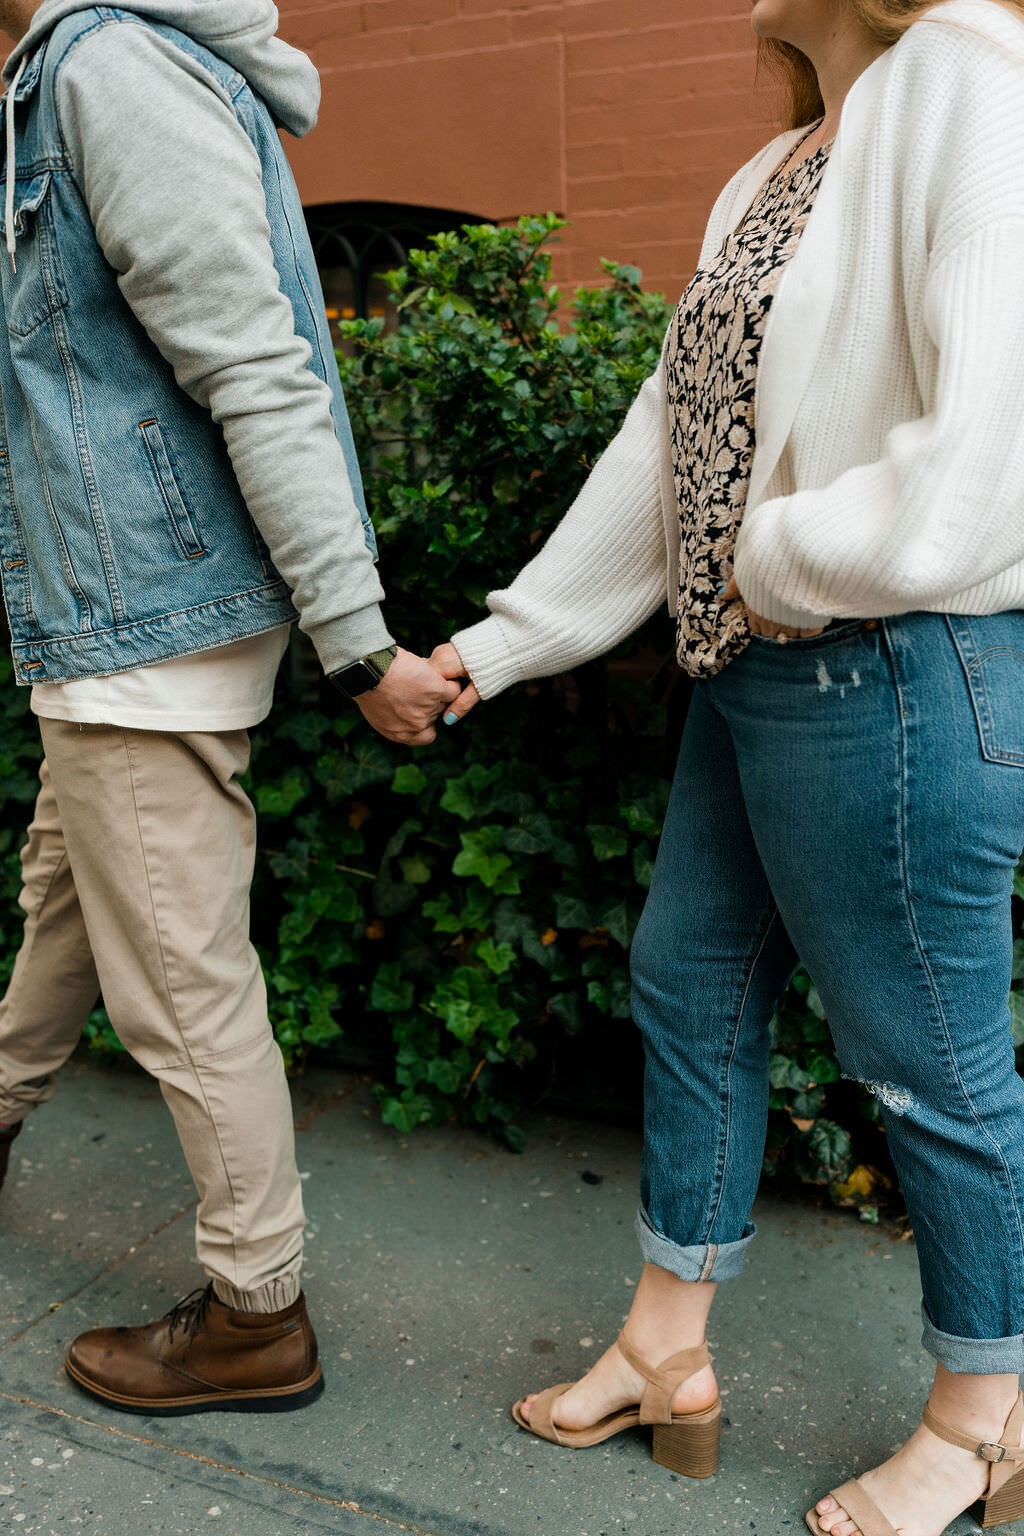 man reaching back and holding womans hands on a city sidewalk